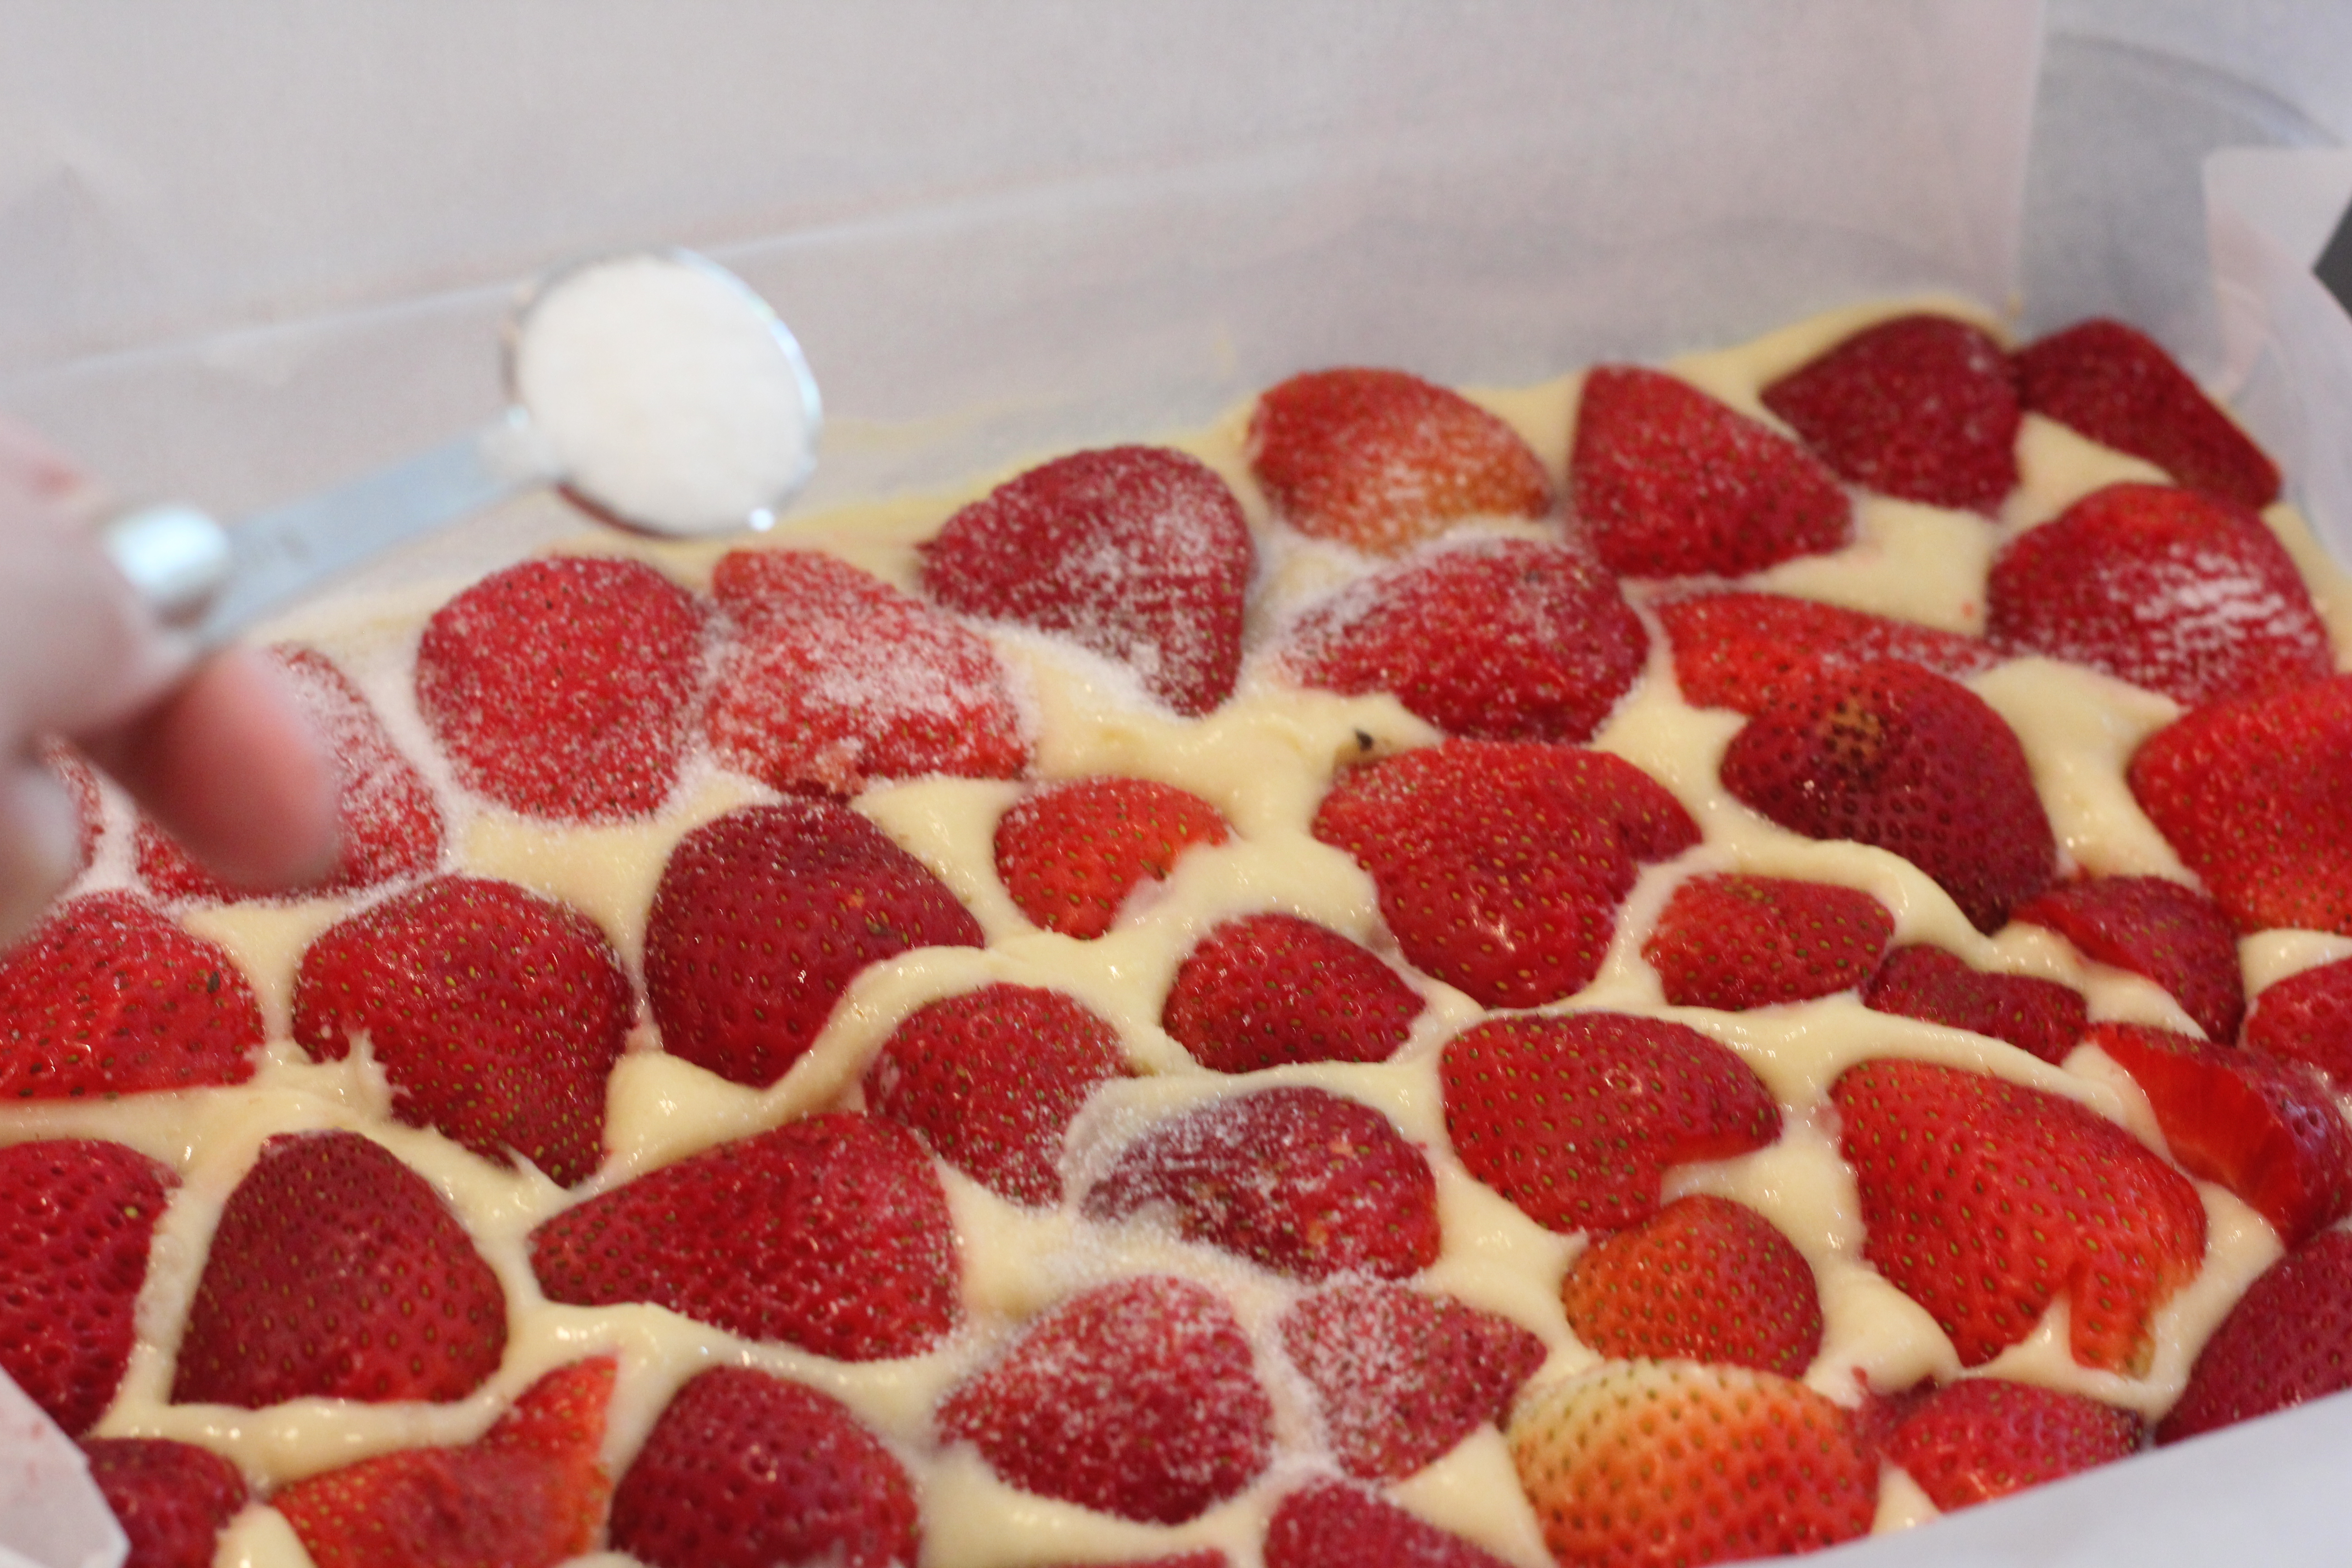 Topping cake with sugar for Strawberry Sheet Cake @ bestwithchocolate.com